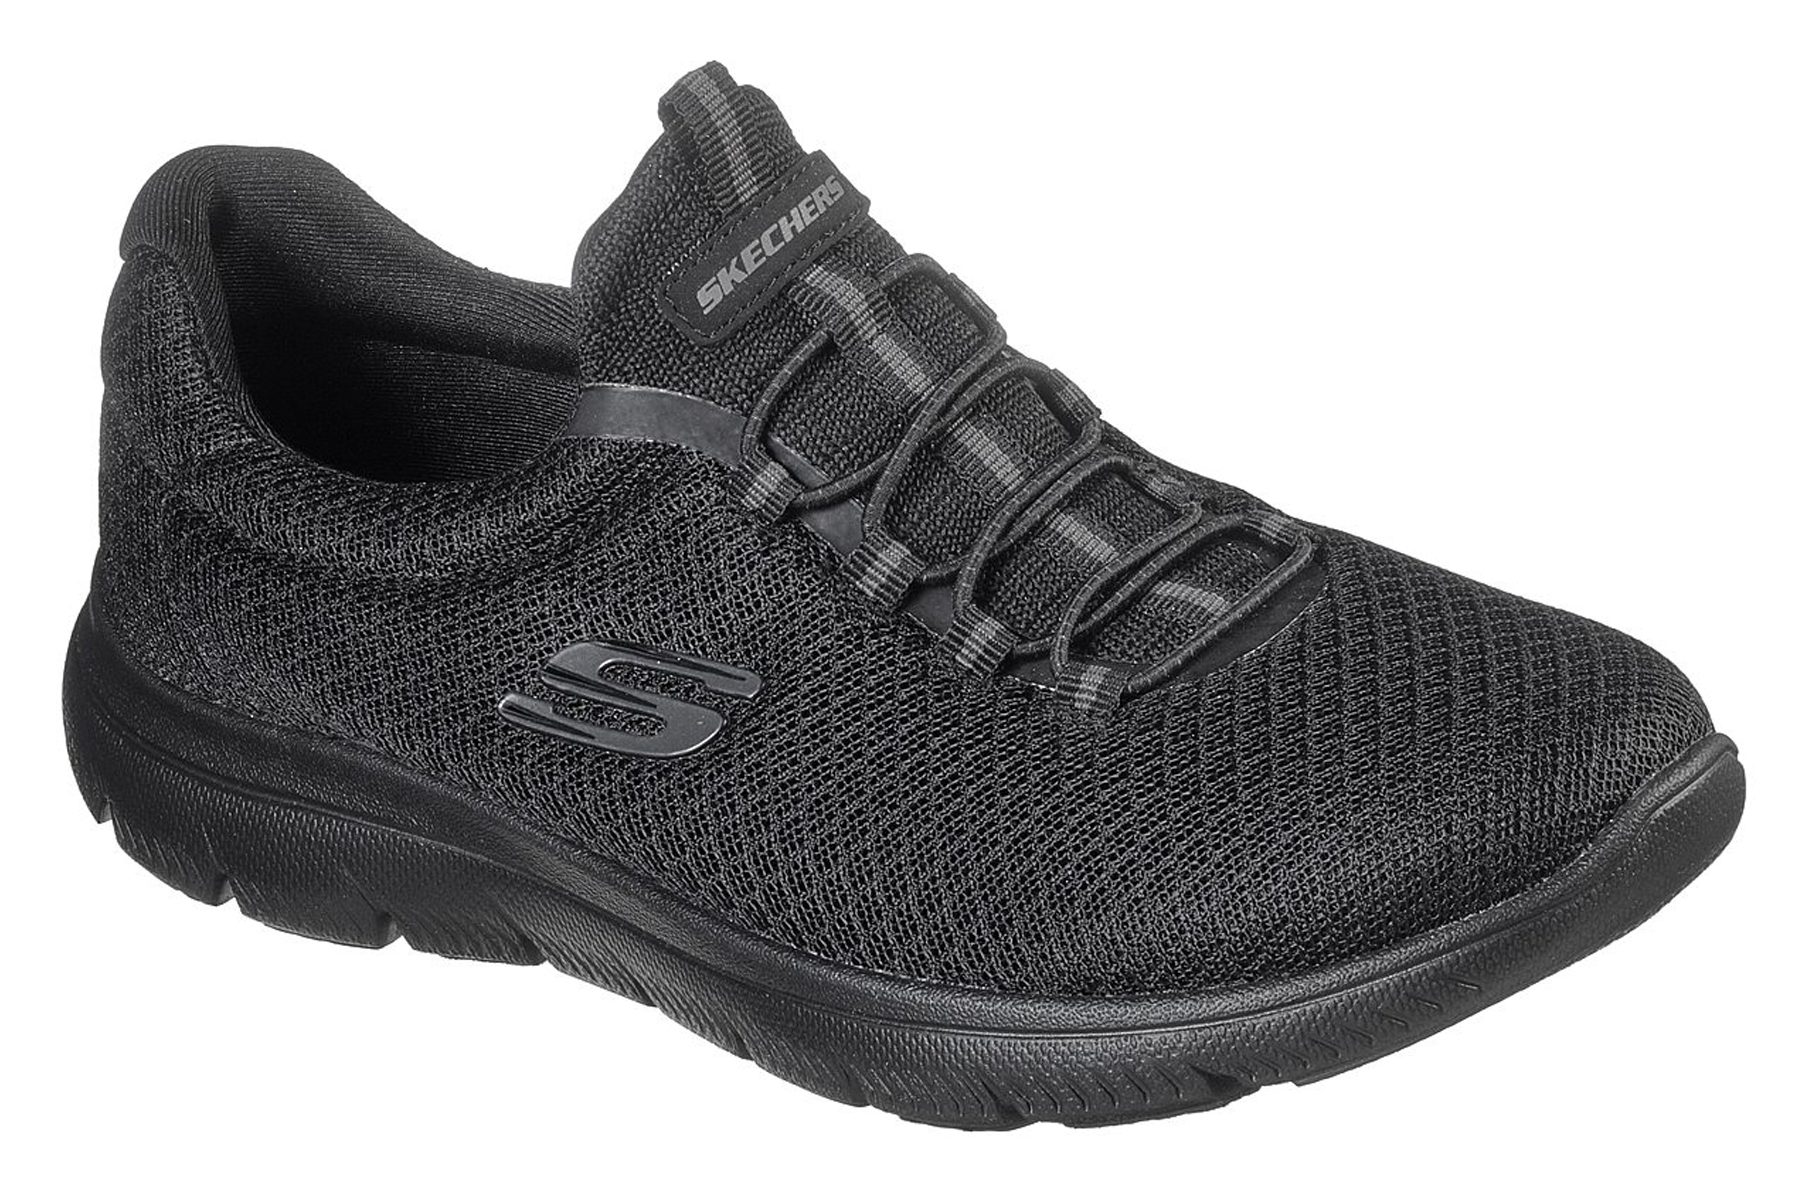 Skechers Summits Black 12980 BBK - Everyday Shoes - Humphries Shoes